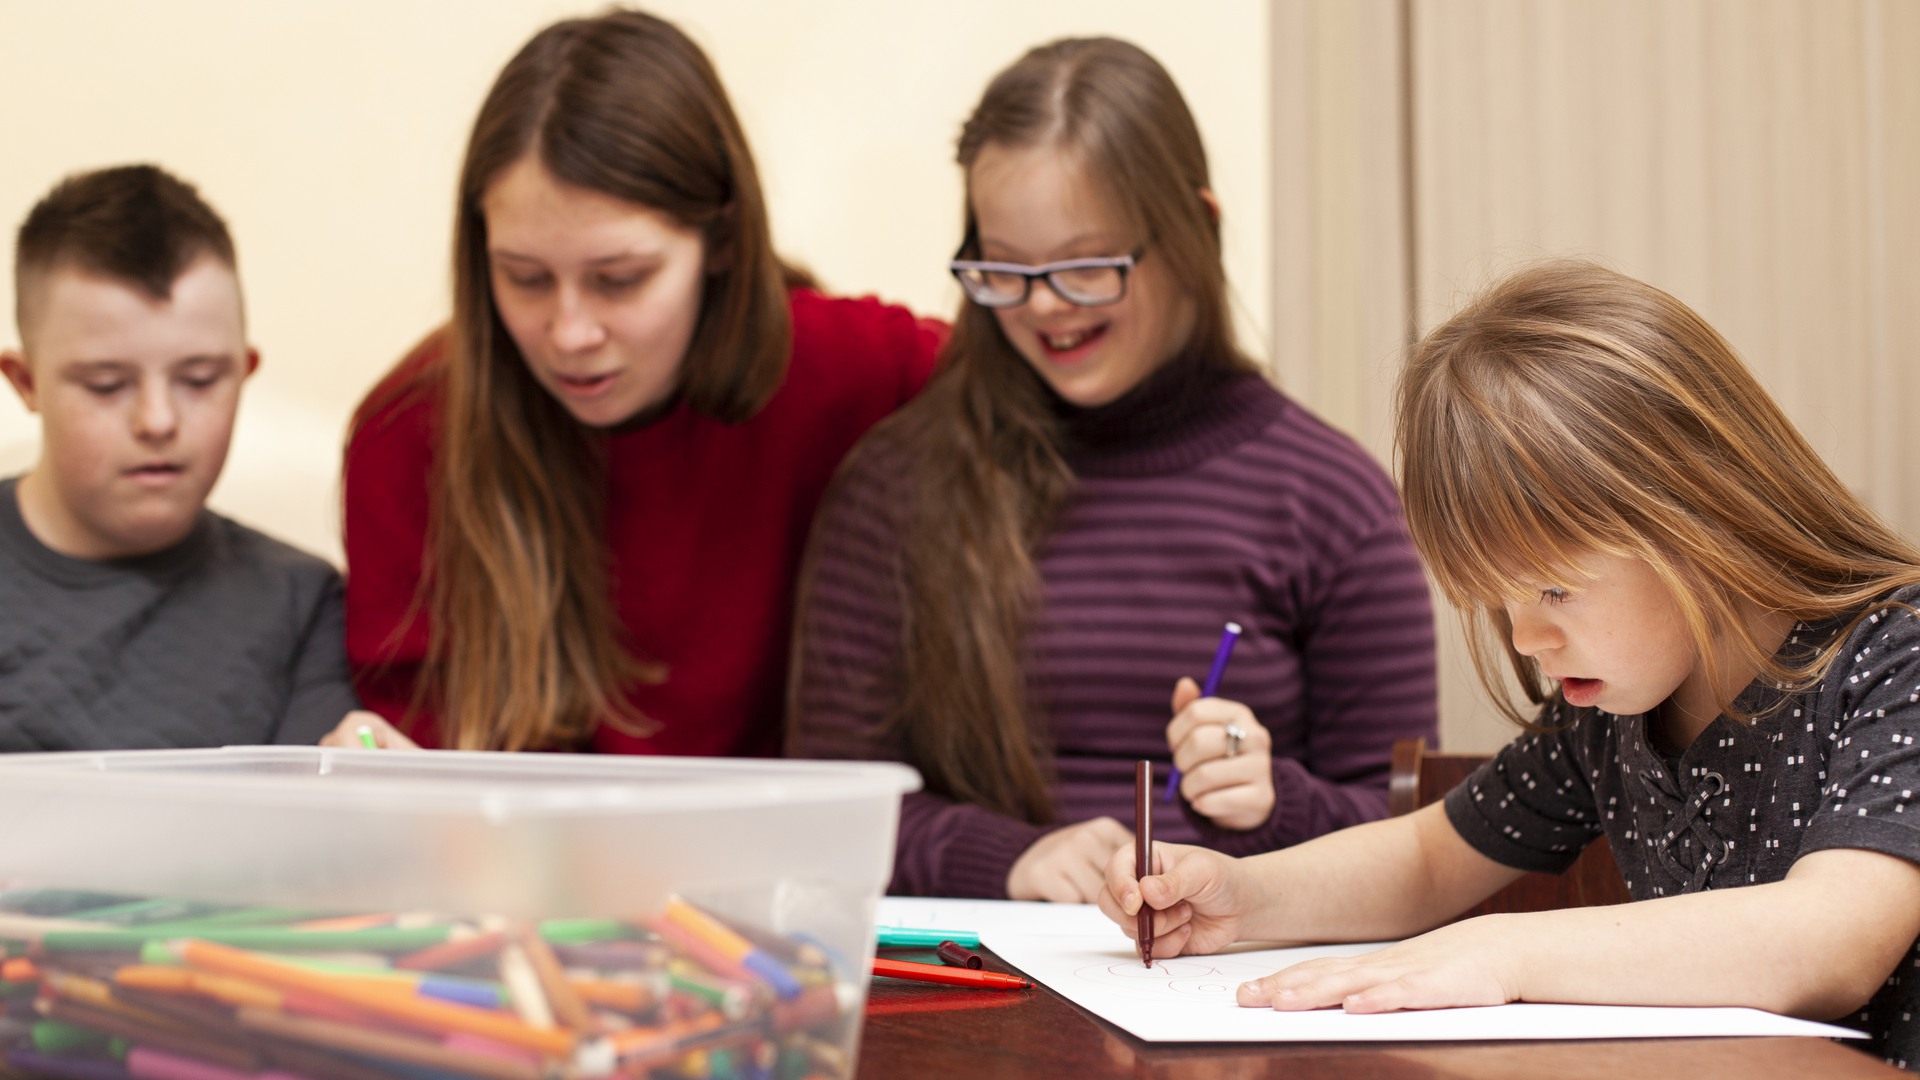 drawing workshop with children with down syndrome